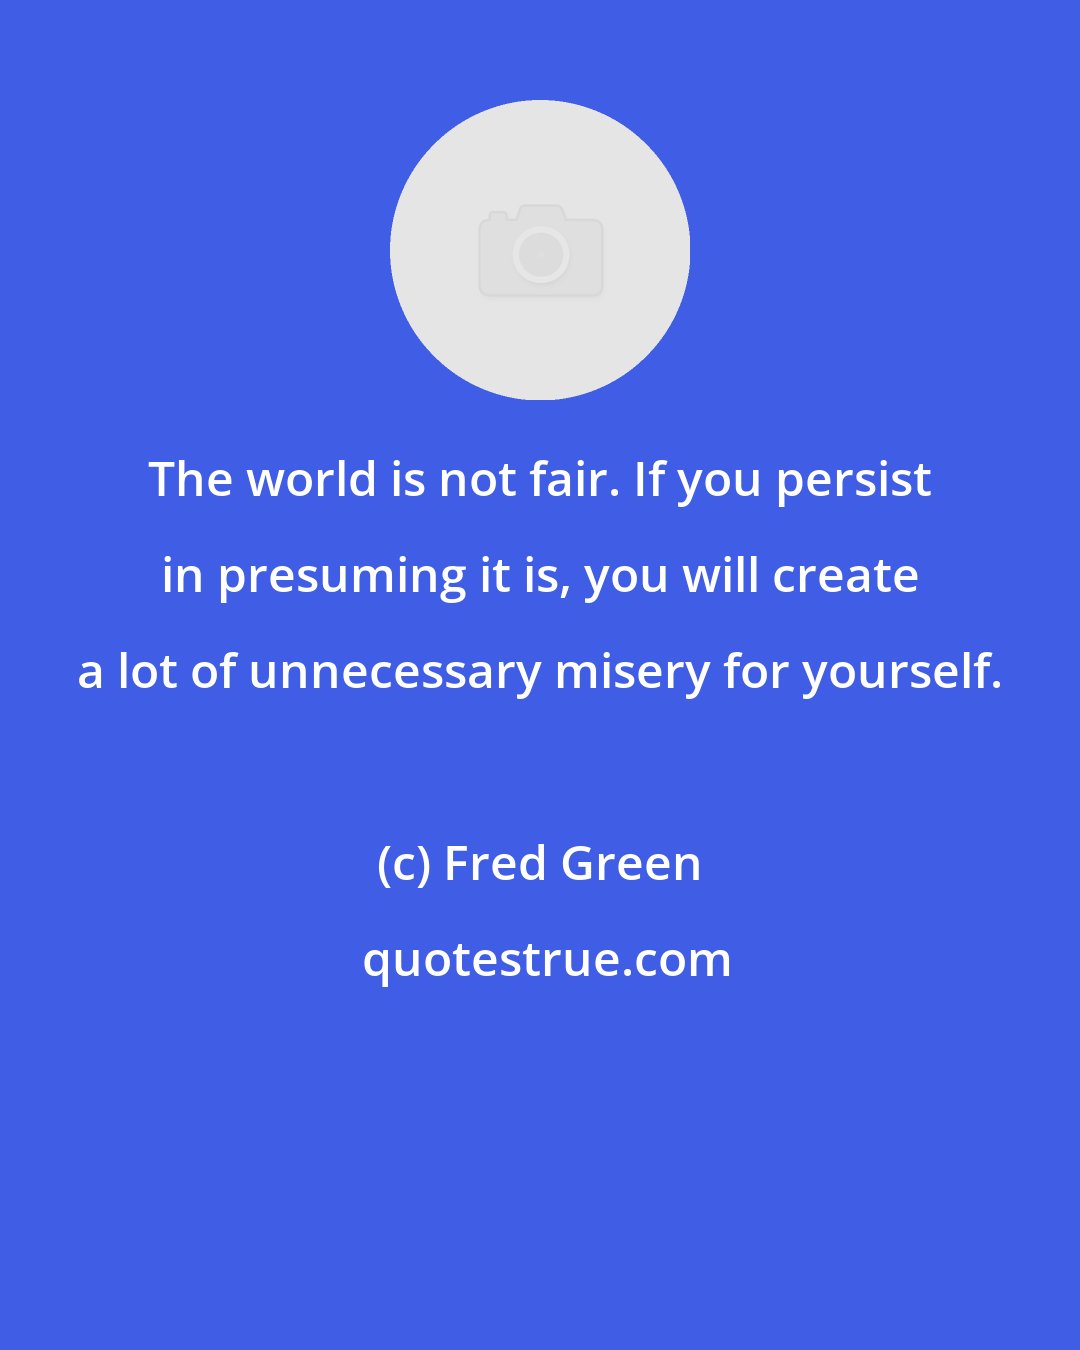 Fred Green: The world is not fair. If you persist in presuming it is, you will create a lot of unnecessary misery for yourself.